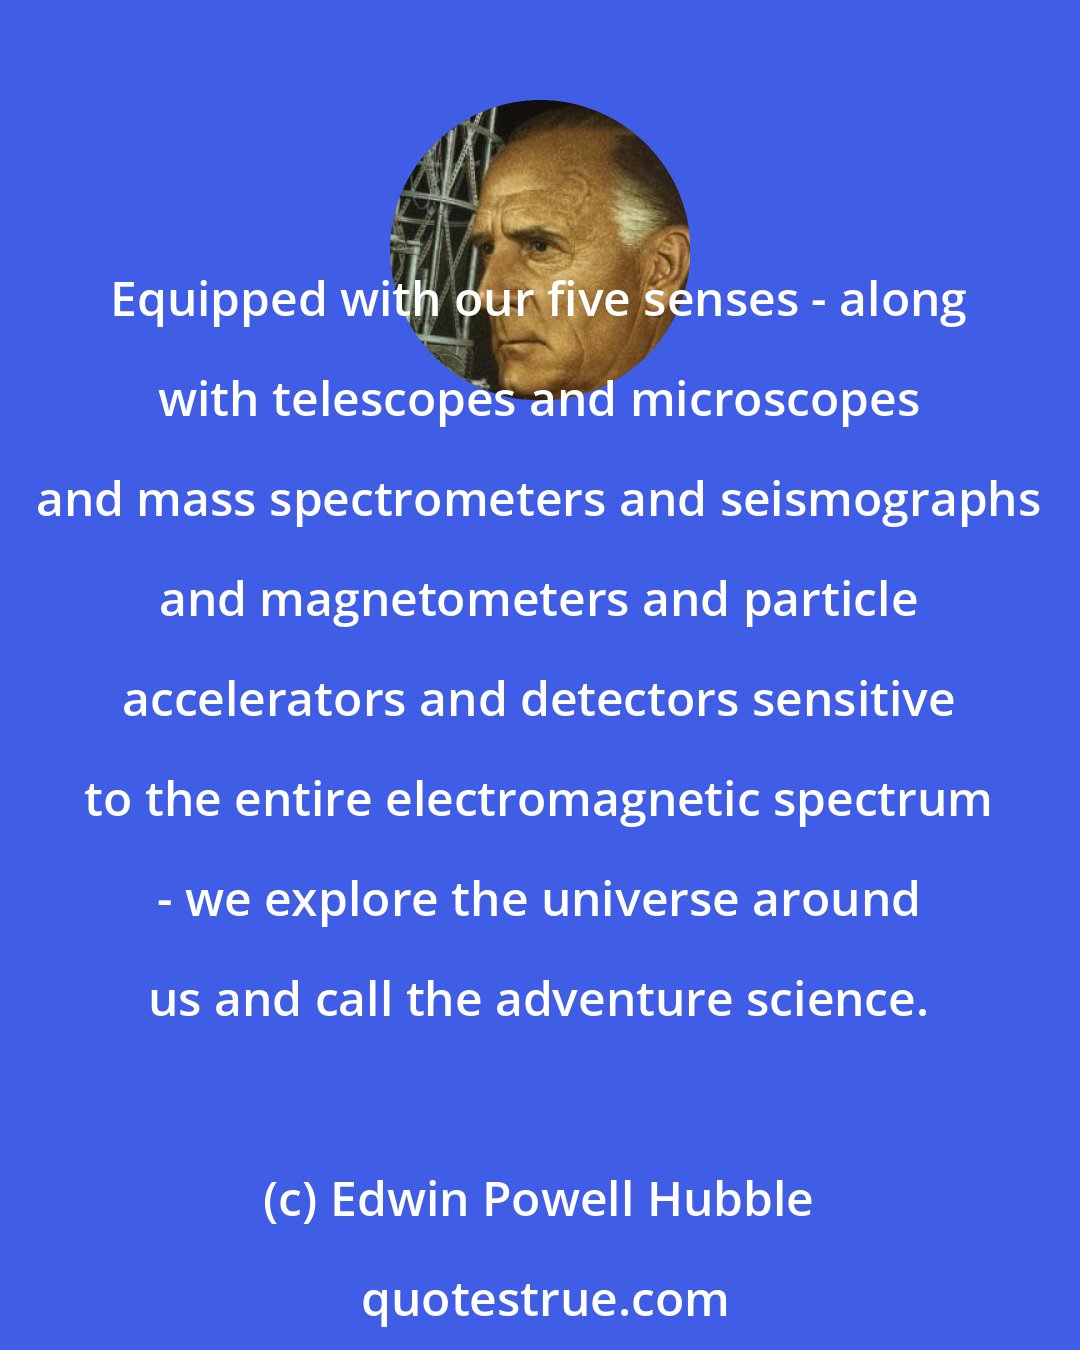 Edwin Powell Hubble: Equipped with our five senses - along with telescopes and microscopes and mass spectrometers and seismographs and magnetometers and particle accelerators and detectors sensitive to the entire electromagnetic spectrum - we explore the universe around us and call the adventure science.